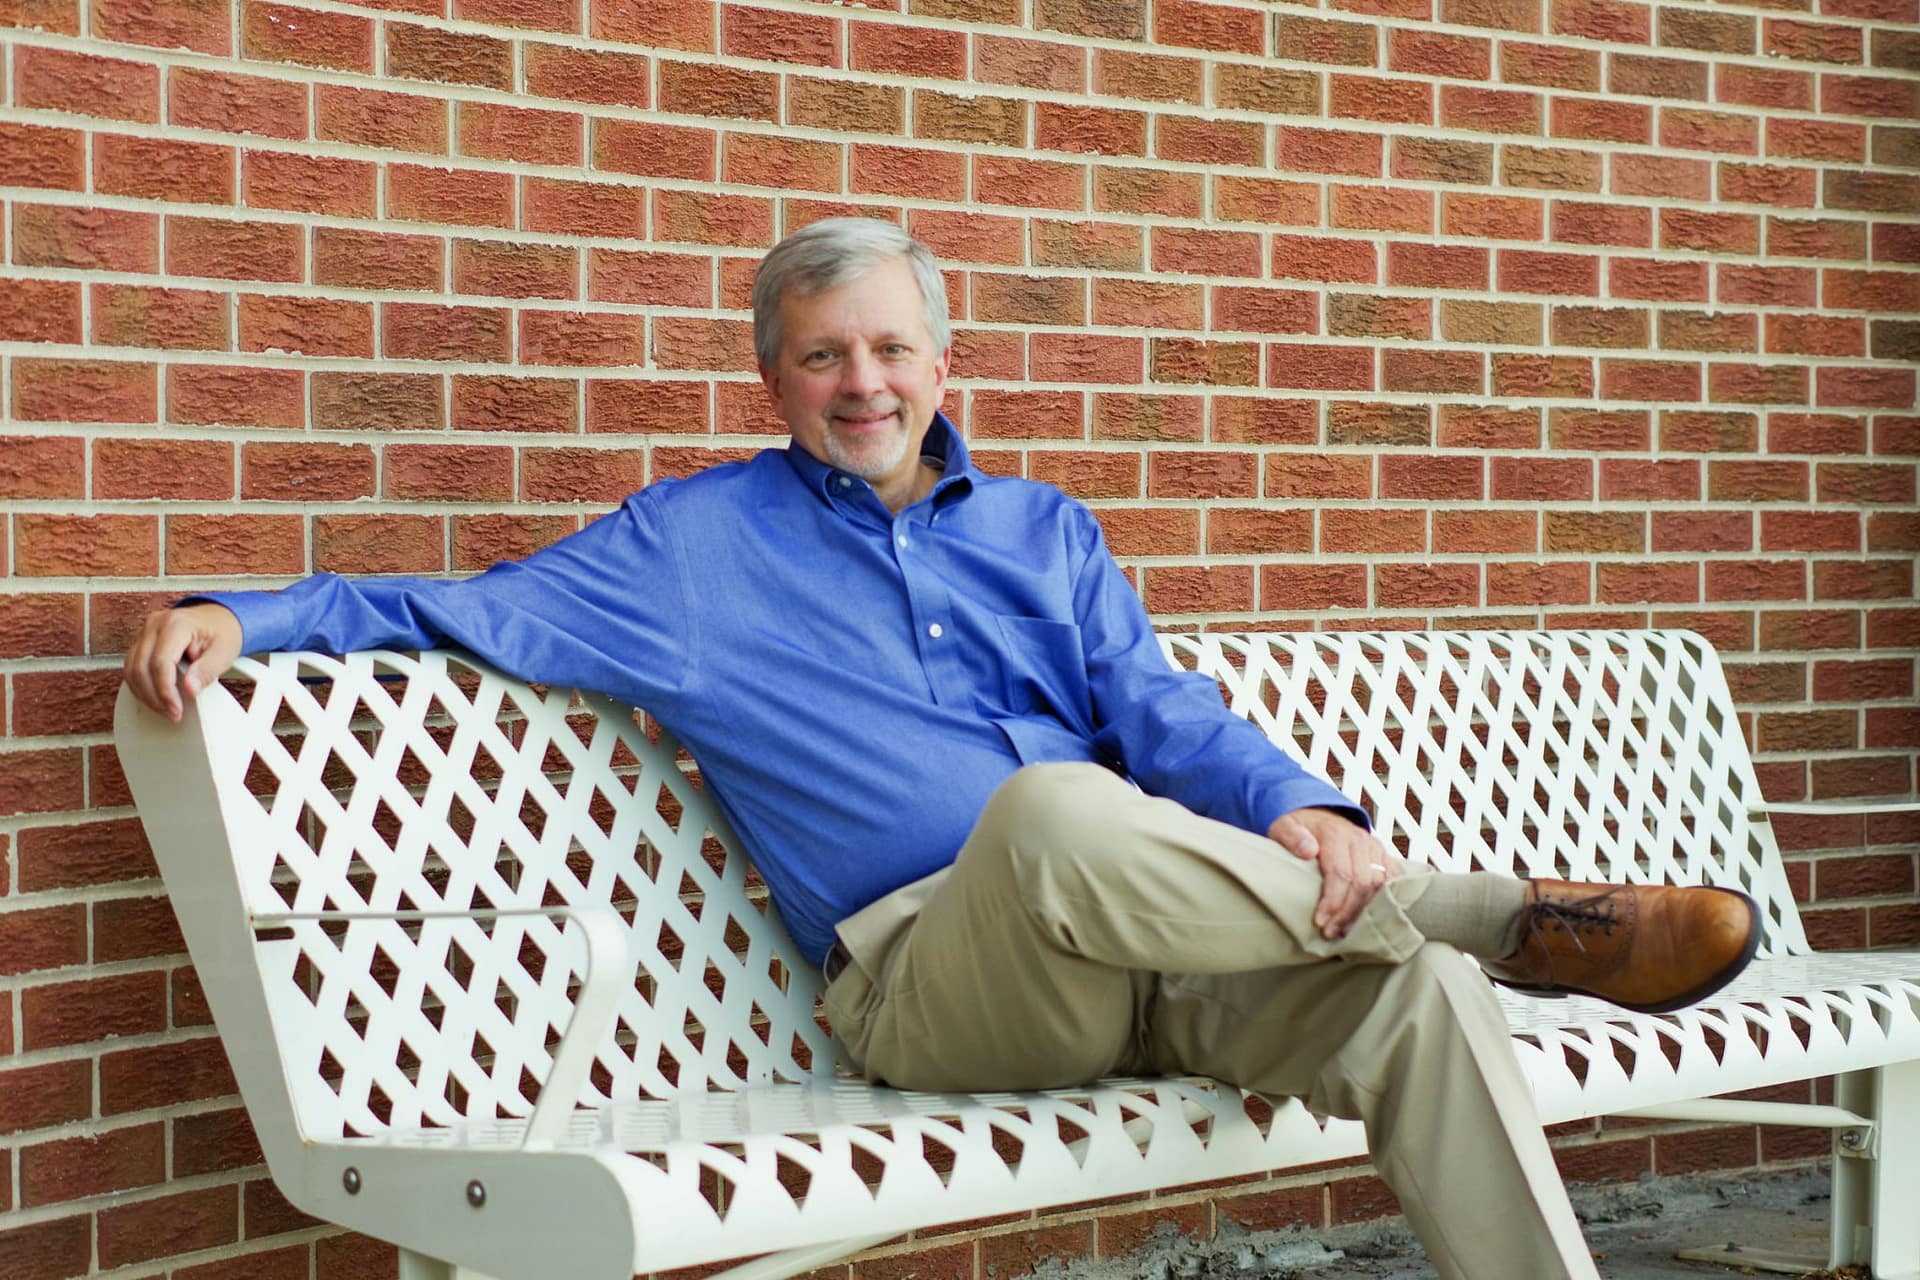 Mark dorn sits on a bench with a brick wall behind him, he is smiling